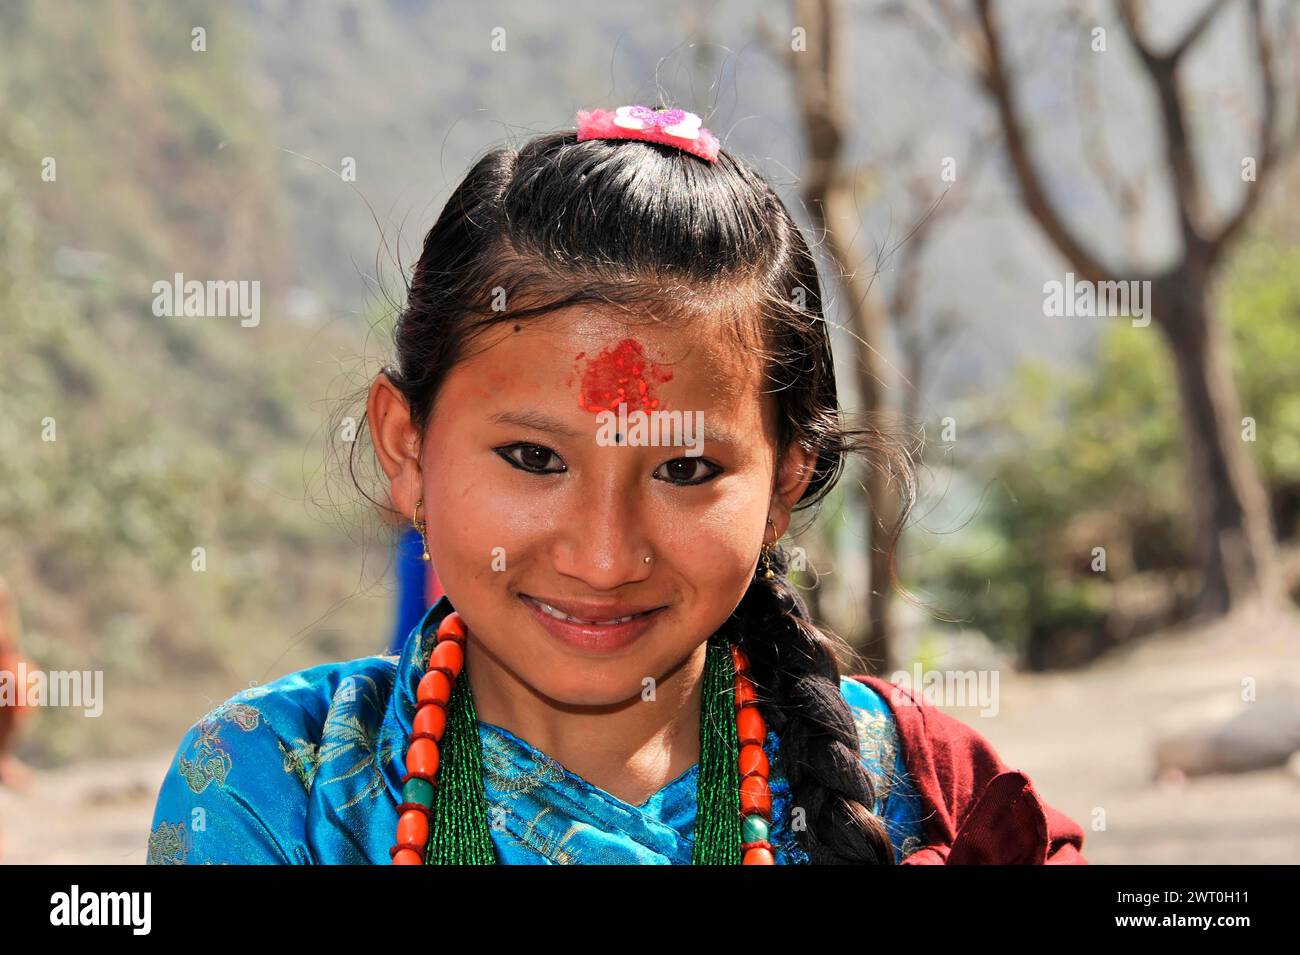 Portrait of a smiling young girl in traditional dress, Bhairahawa, Pokhara, Nepal Stock Photo